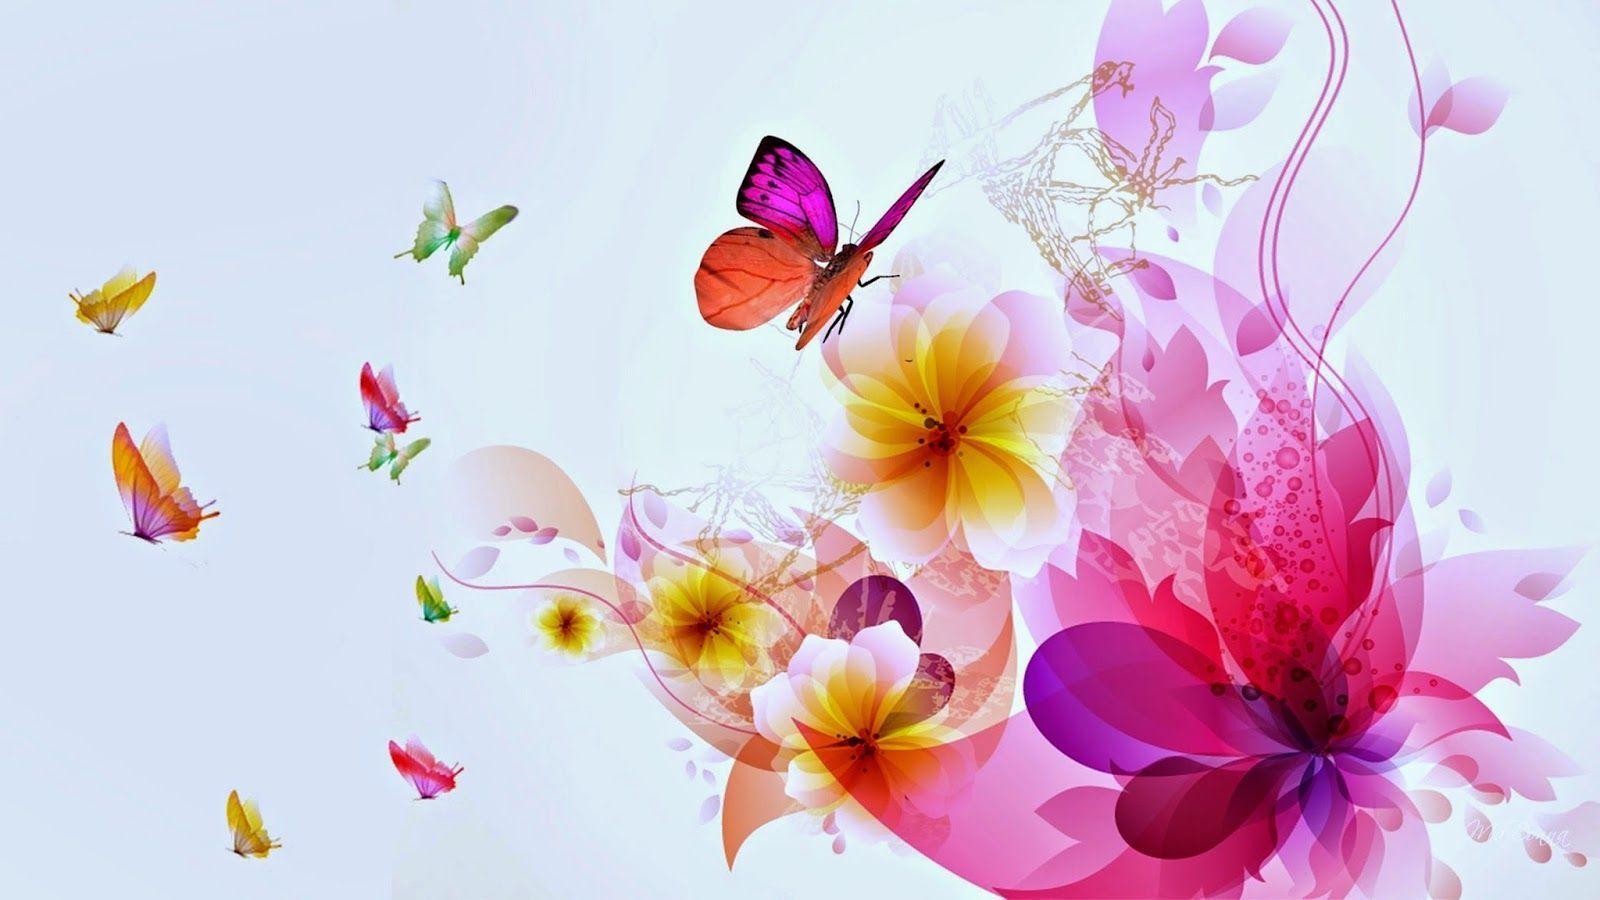 Modern day Wallpaper Colorful Butterfly Embellishment. wallpaper